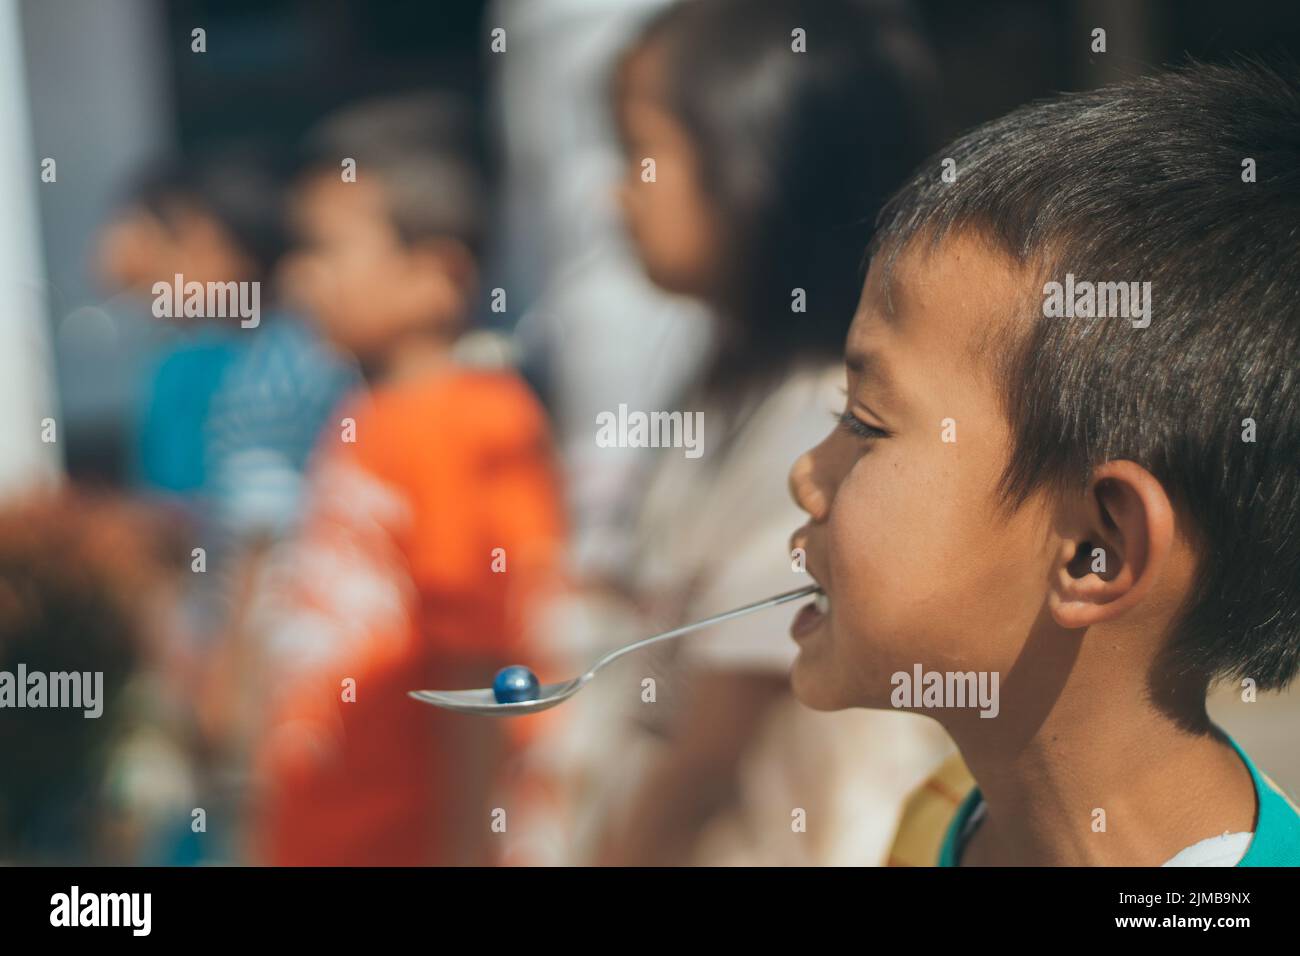 Getasan, Semarang, Indonesia - August 17, 2017: kids play Bite the spoon of marbles to celebrate indonesia independence day Stock Photo